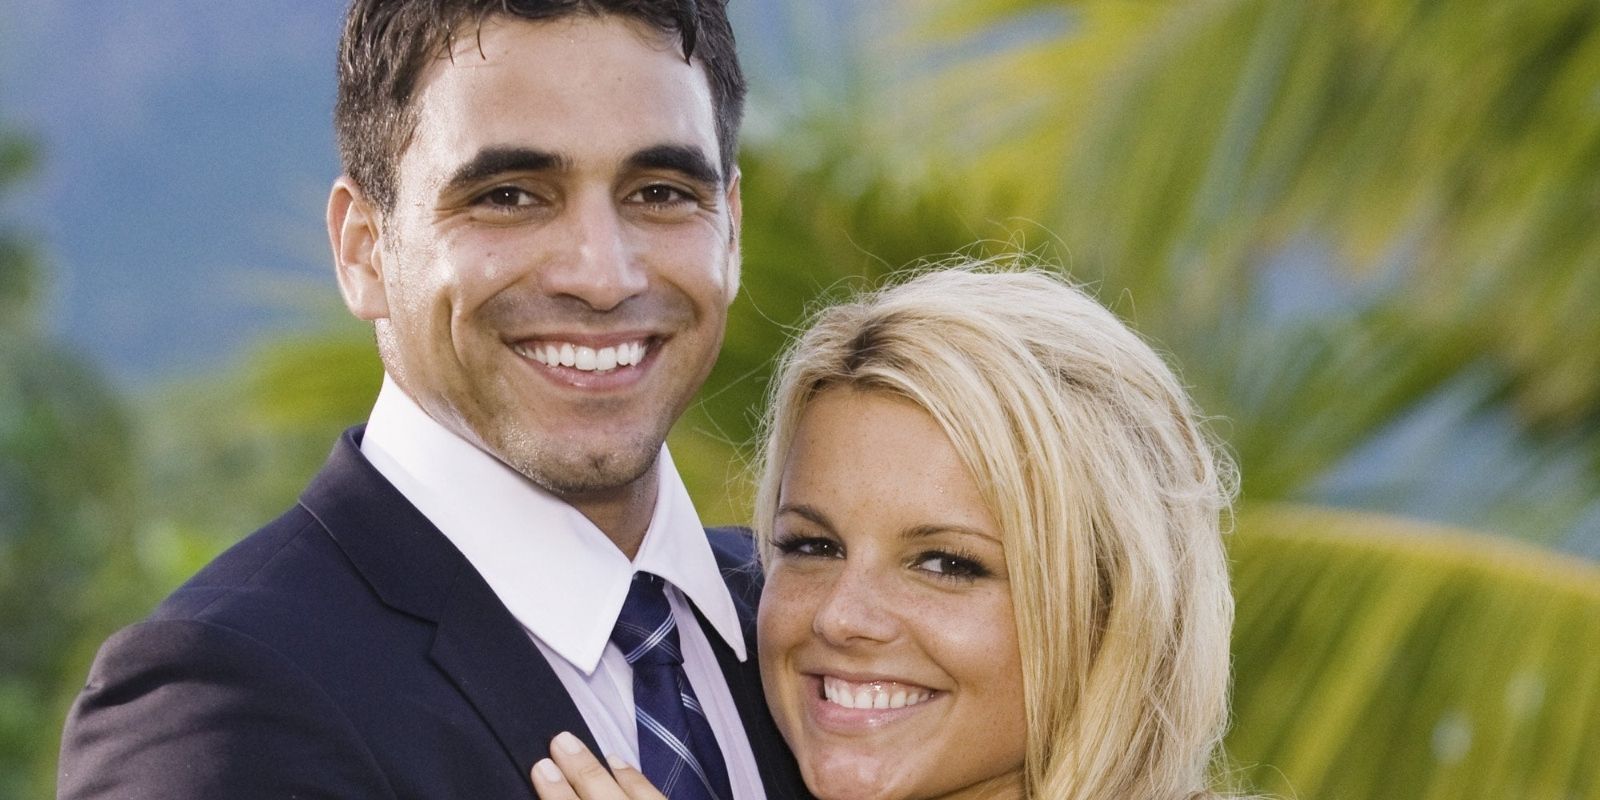 Ali and Roberto posing for a photo in The Bachelorette